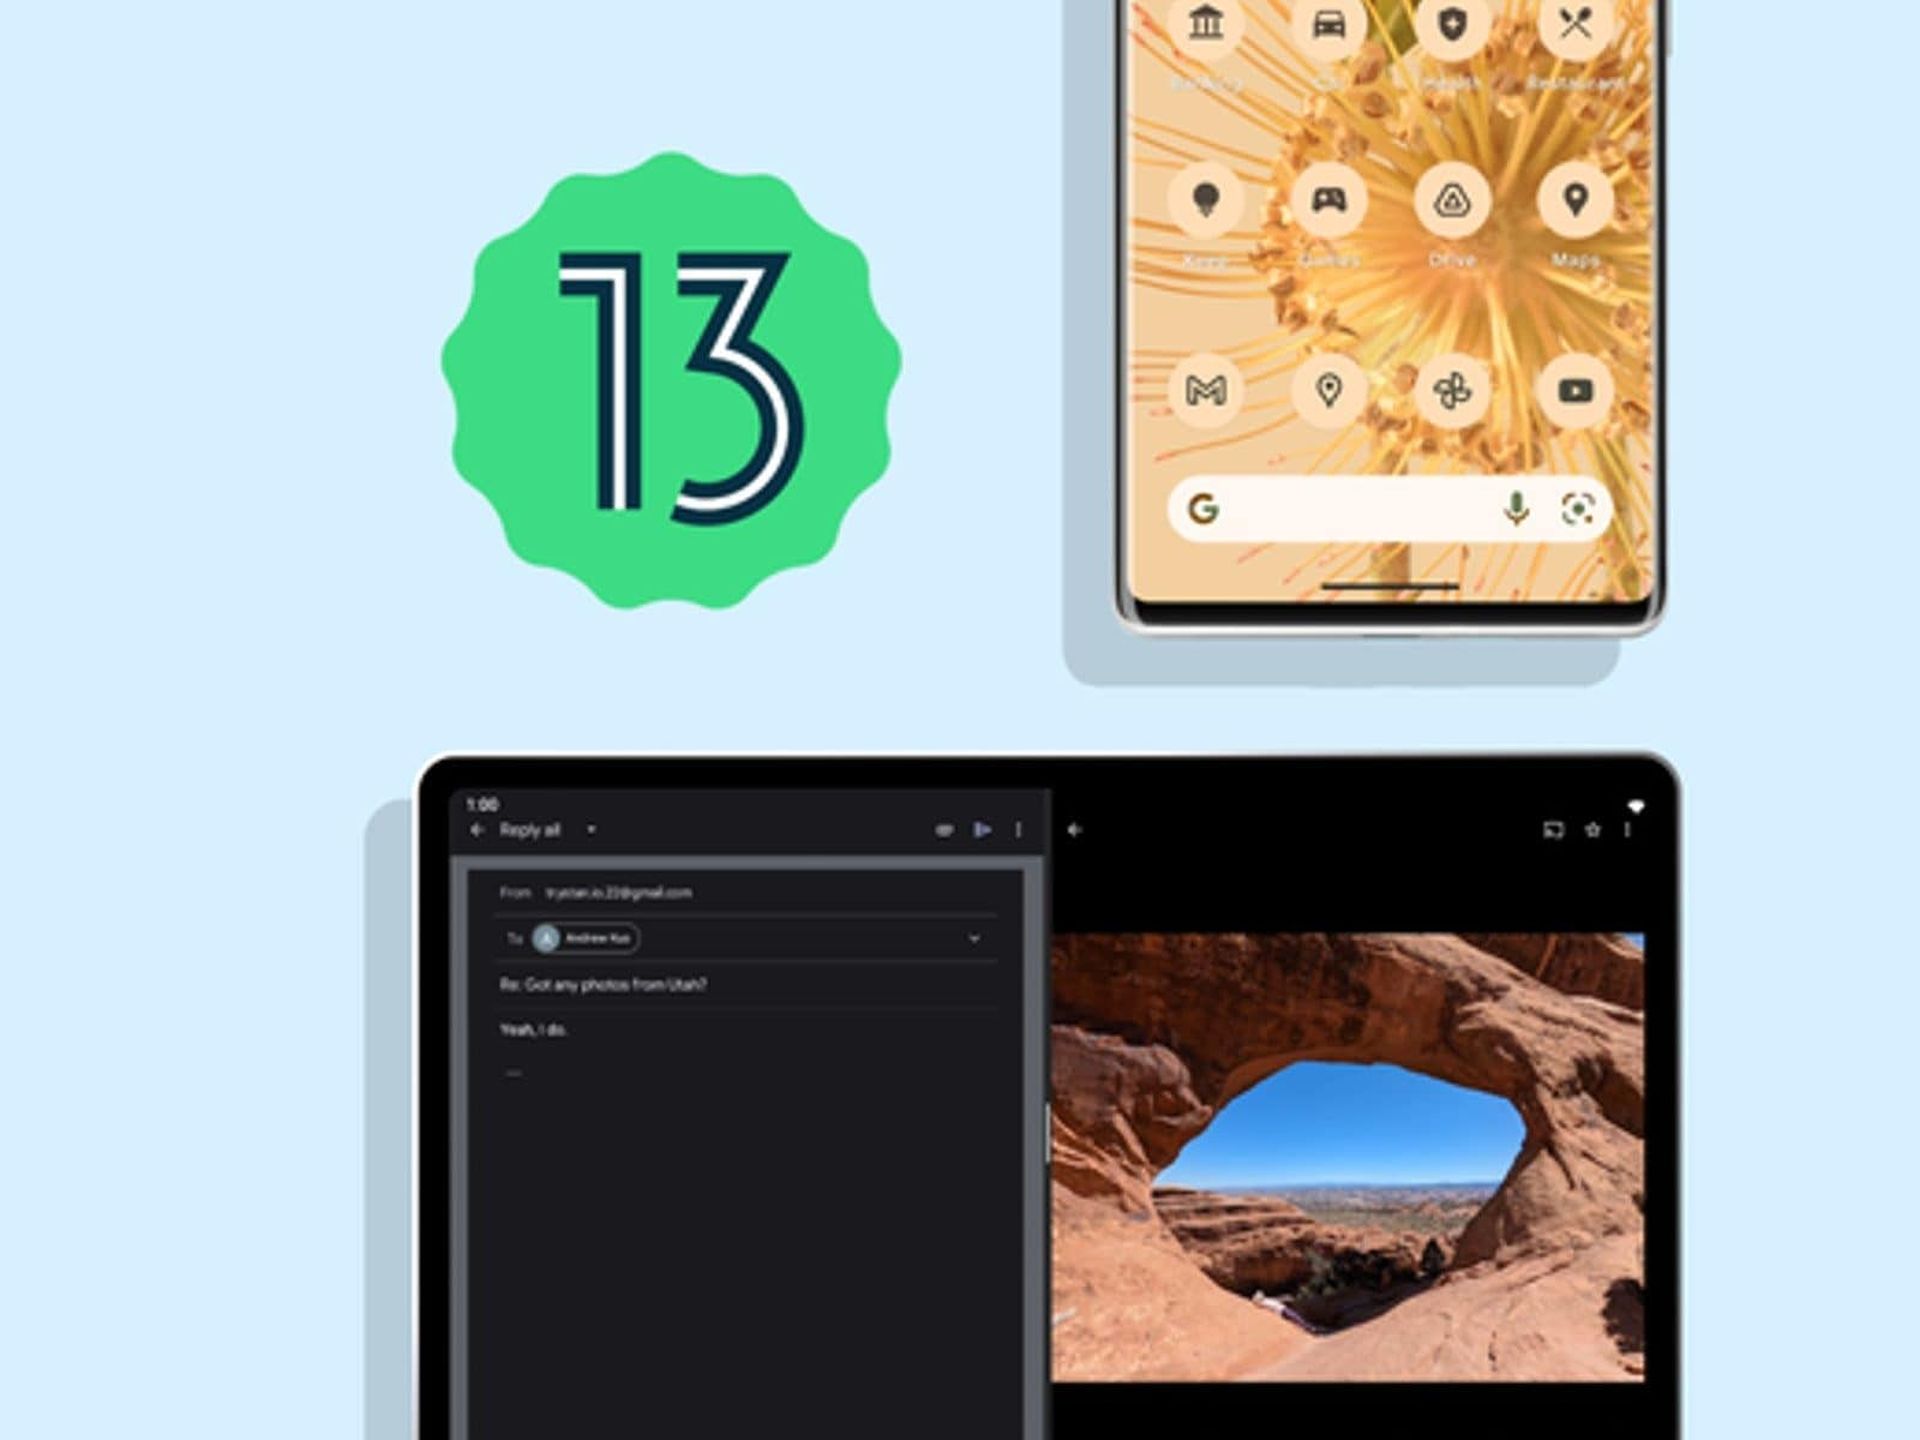 Android 13 is out, but you might not be happy with the changes and looking to learn how to downgrade Android 13 to 12. If so, we've got you covered.